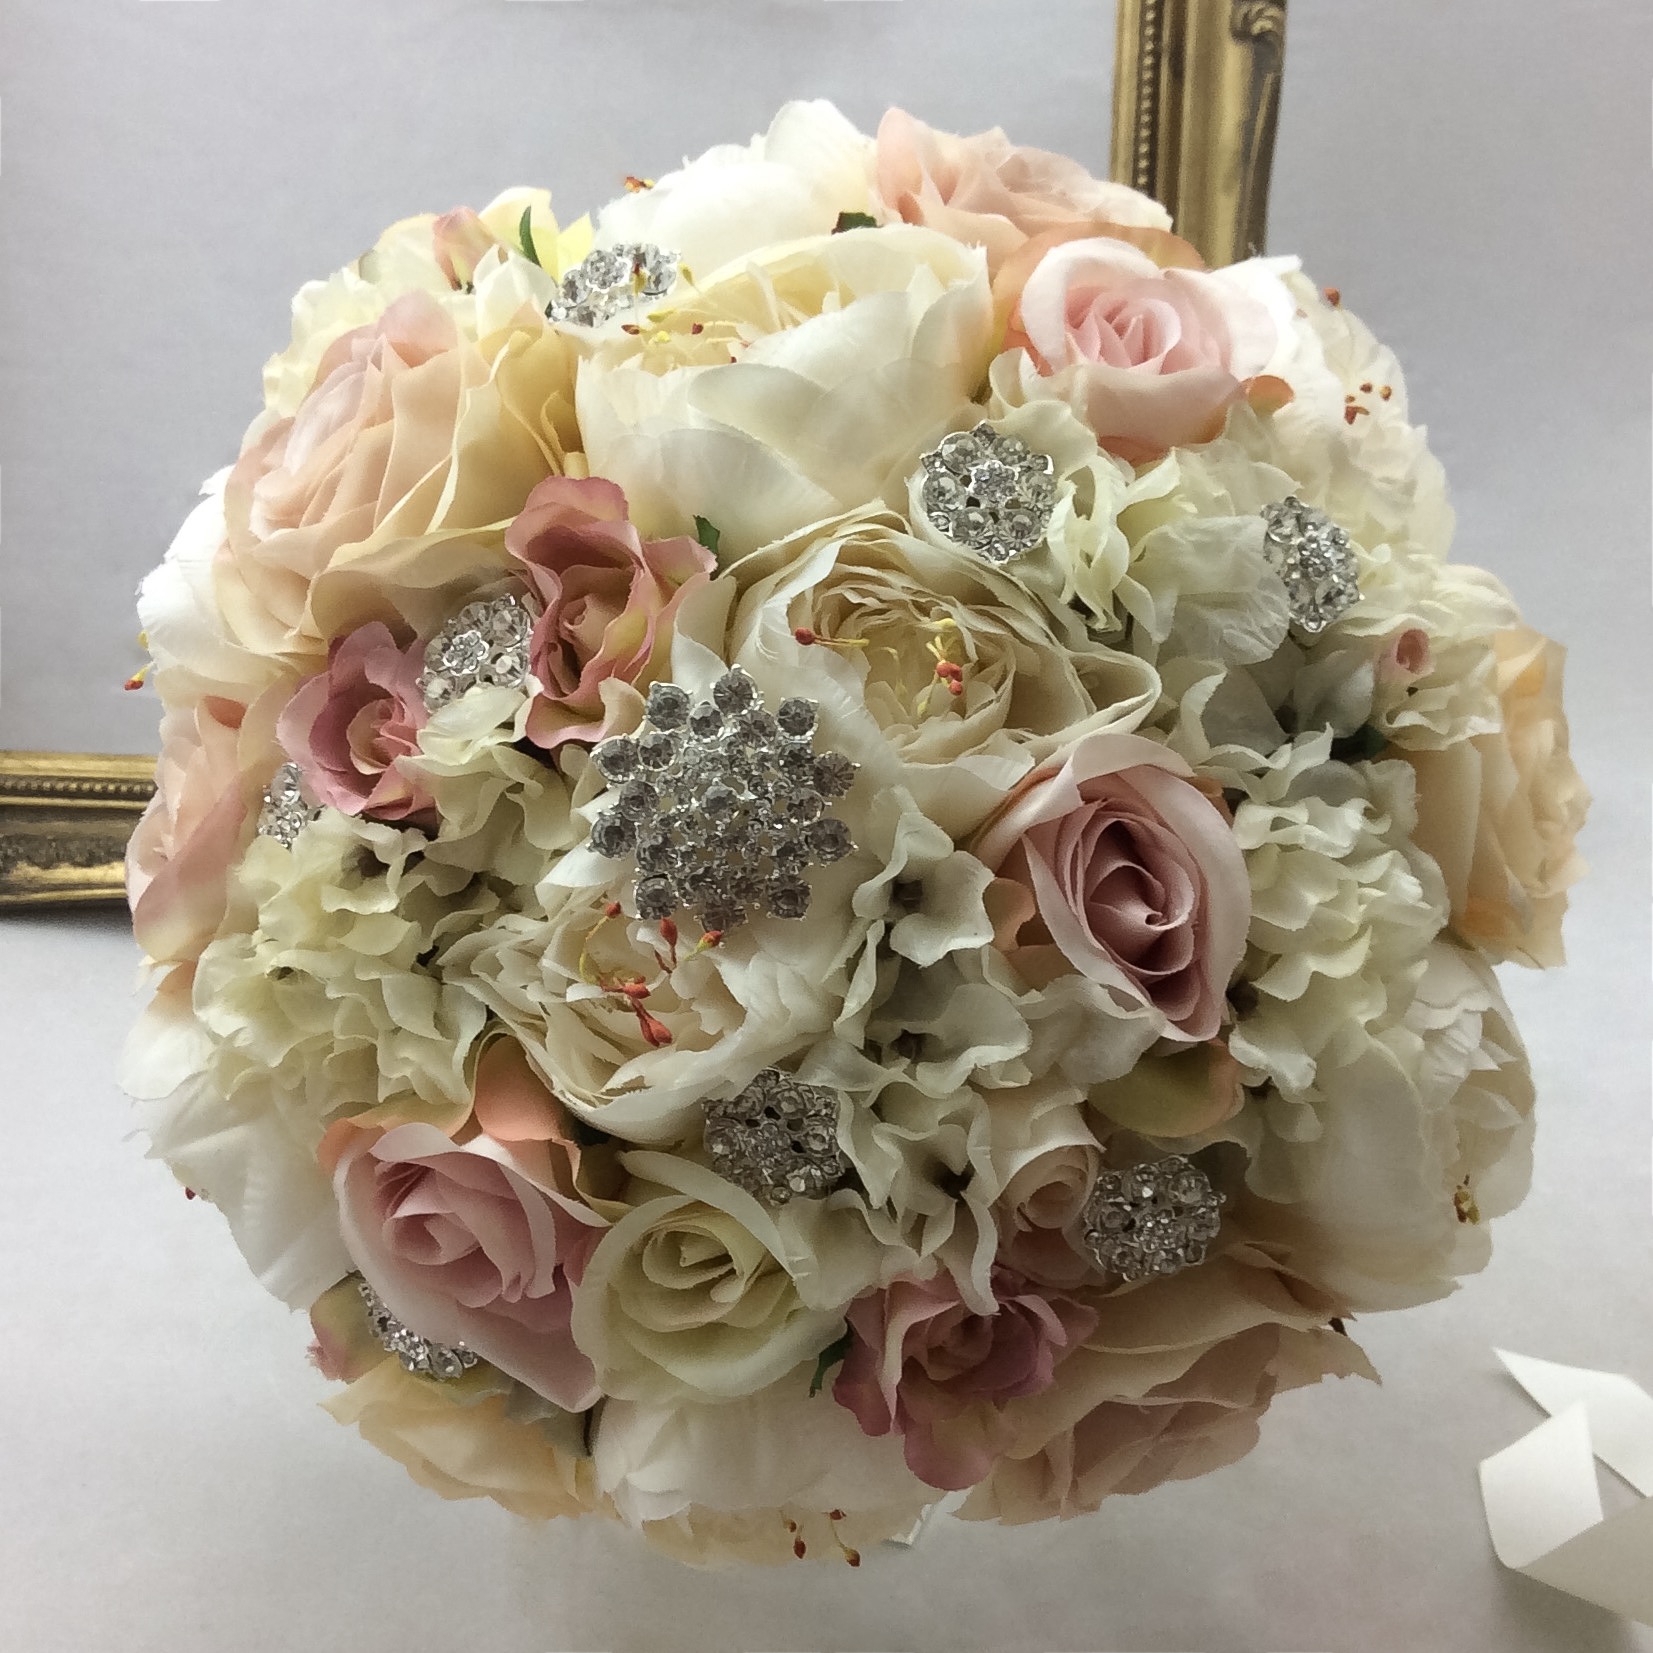 25cm Tall Silk Flowers Artificial Cream and Pink Vintage Rose Bundle 